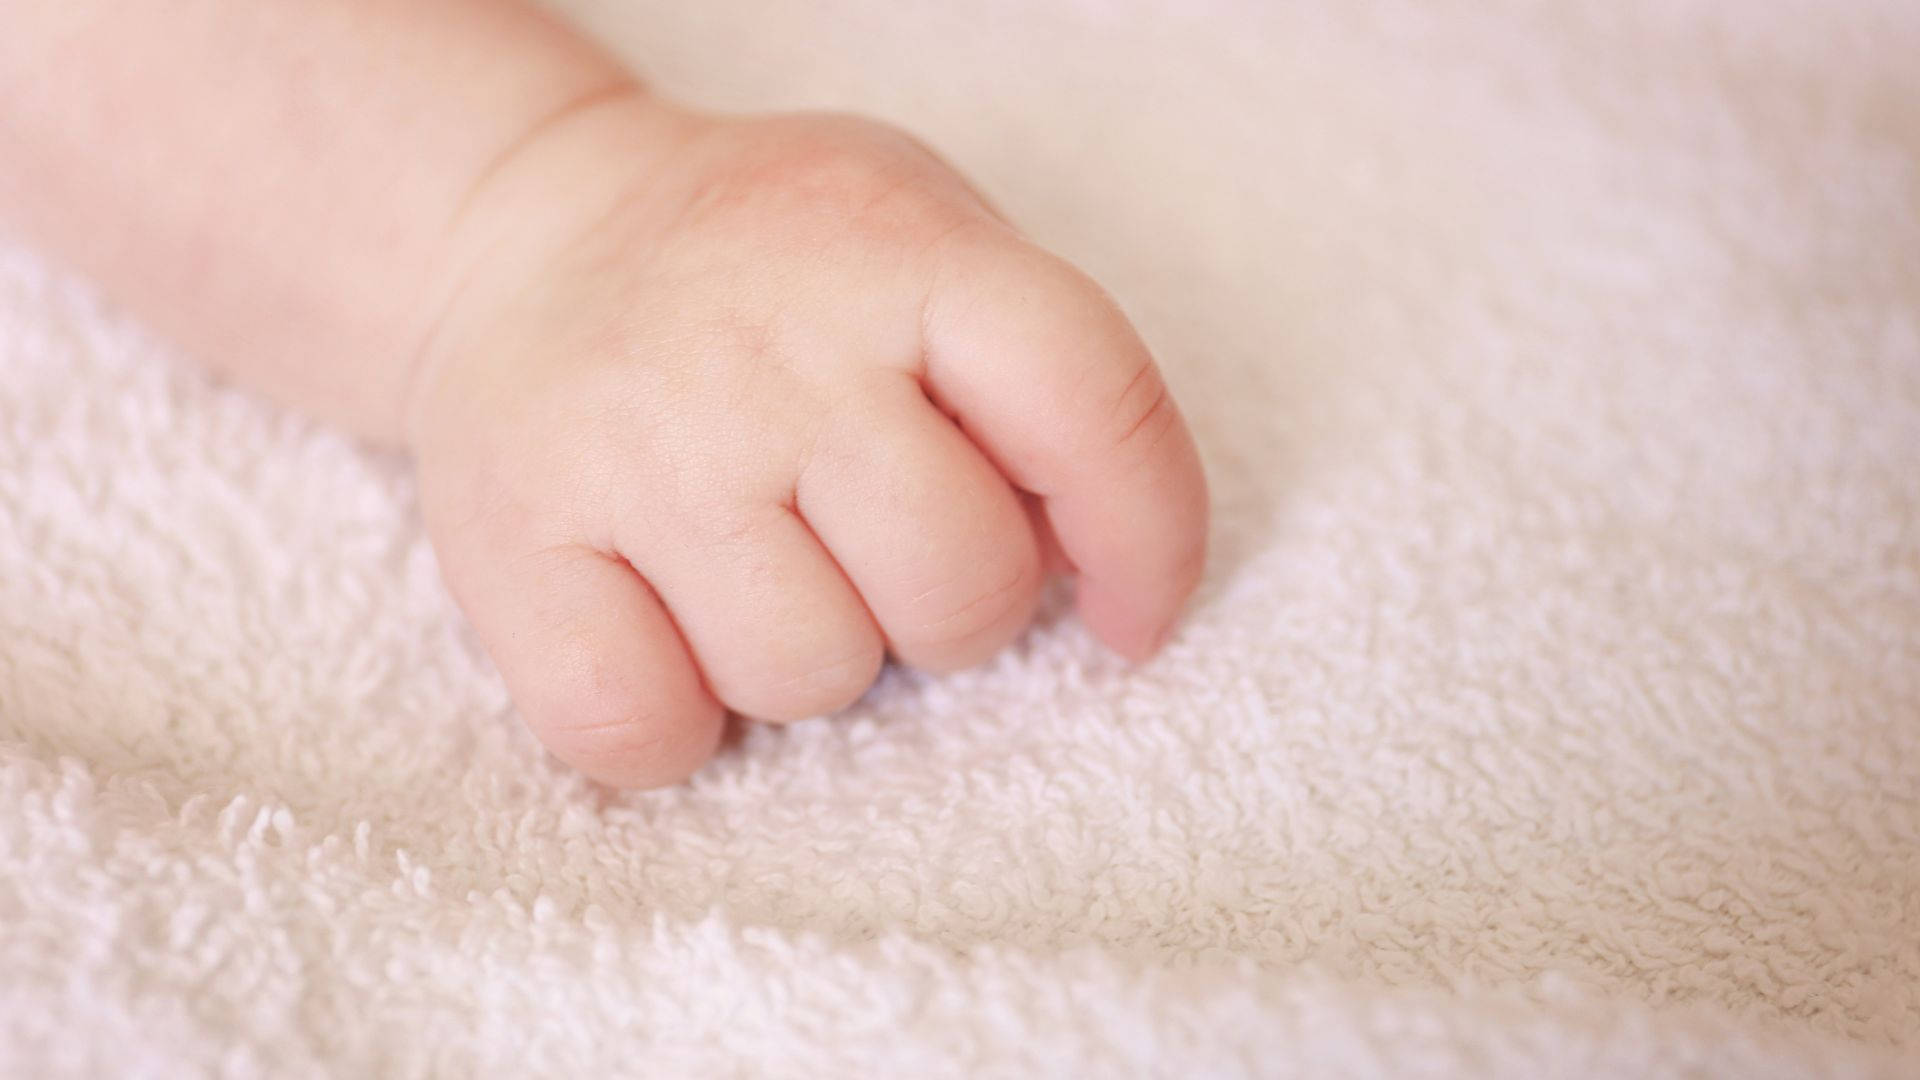 Baby Hand On A Soft Towel Wallpaper